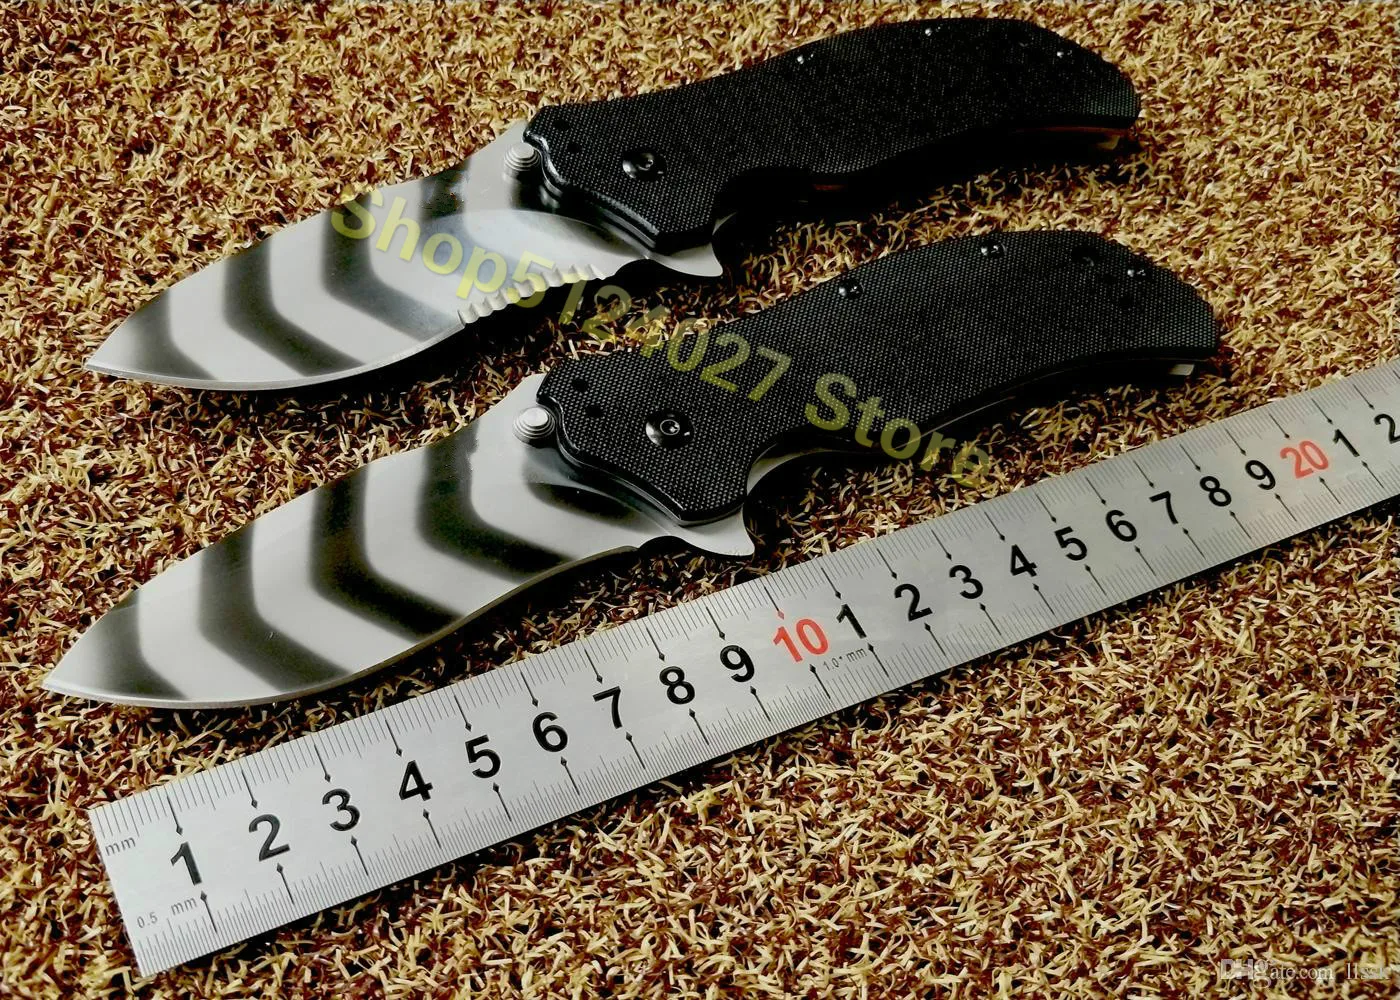 

BF- Best hunting knife 0350TS Auxiliary Folding Knife 3.25 "S30V Tiger Strip Plain Blade, G10, Original Product tactical knives